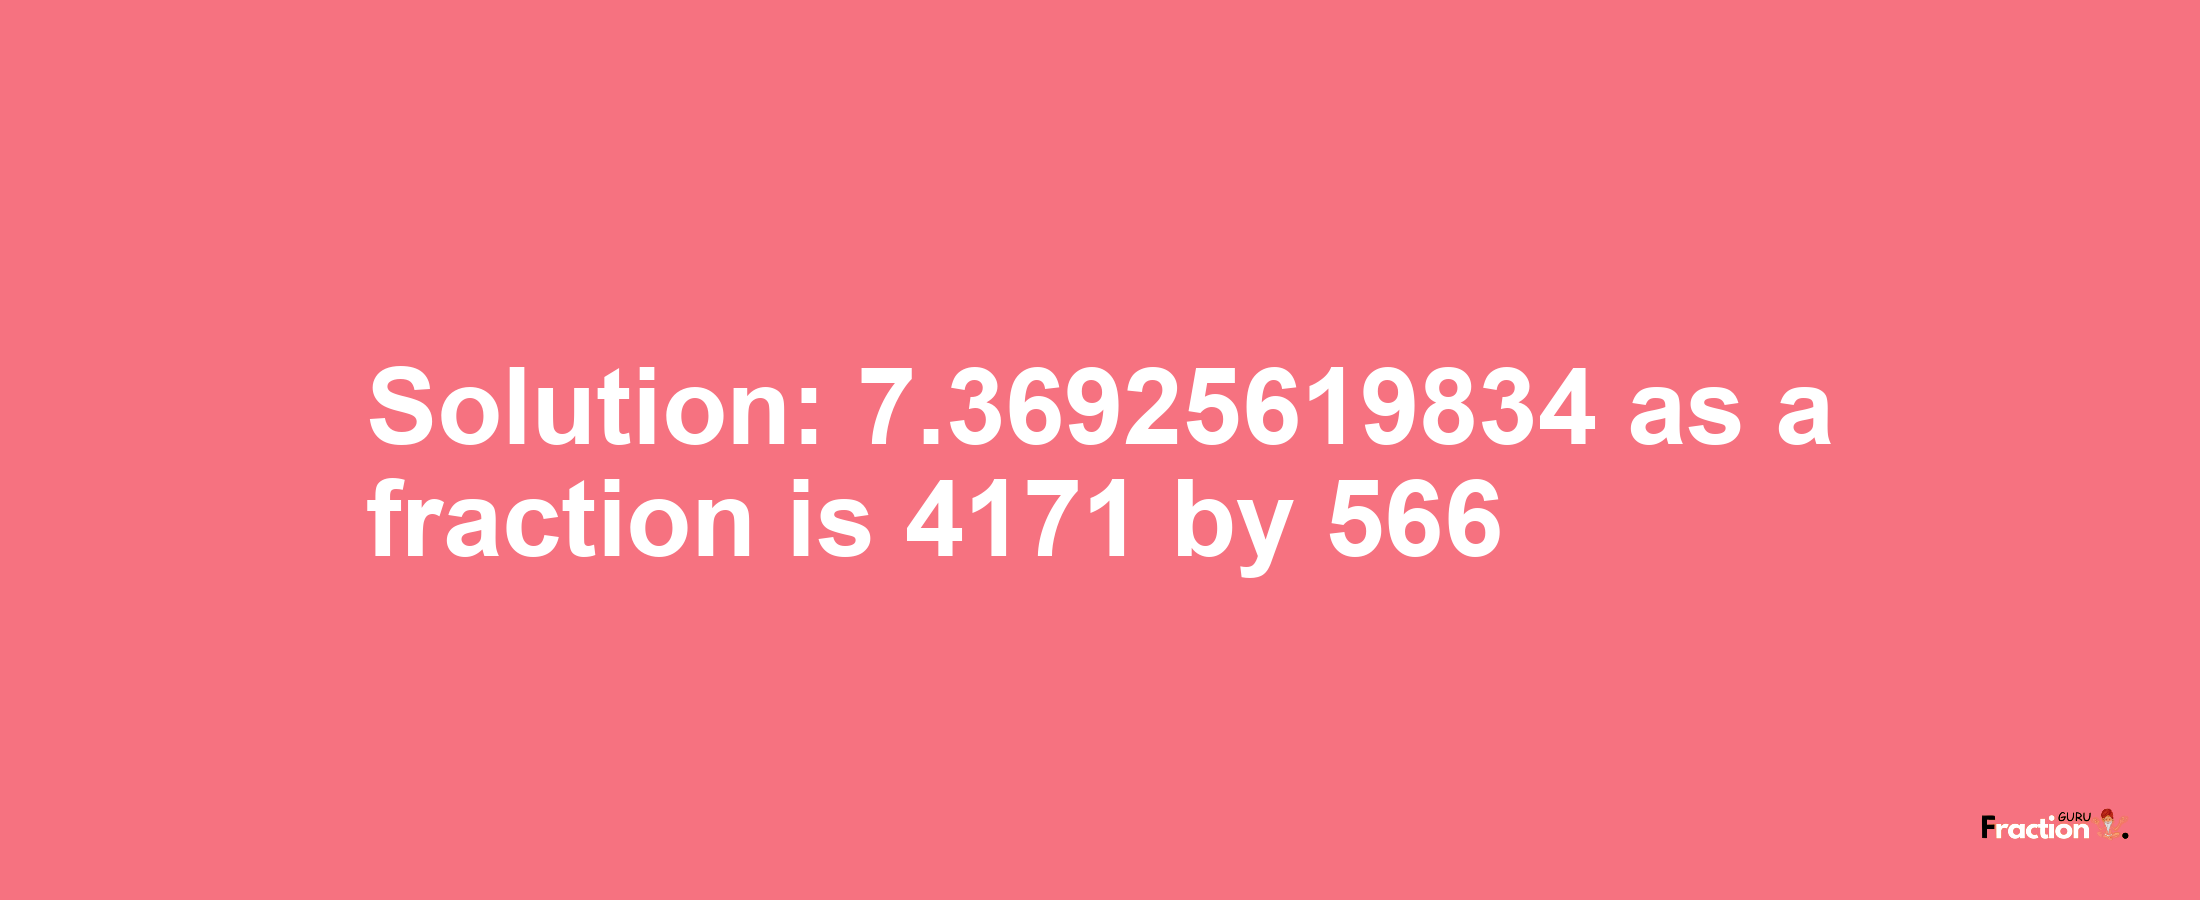 Solution:7.36925619834 as a fraction is 4171/566